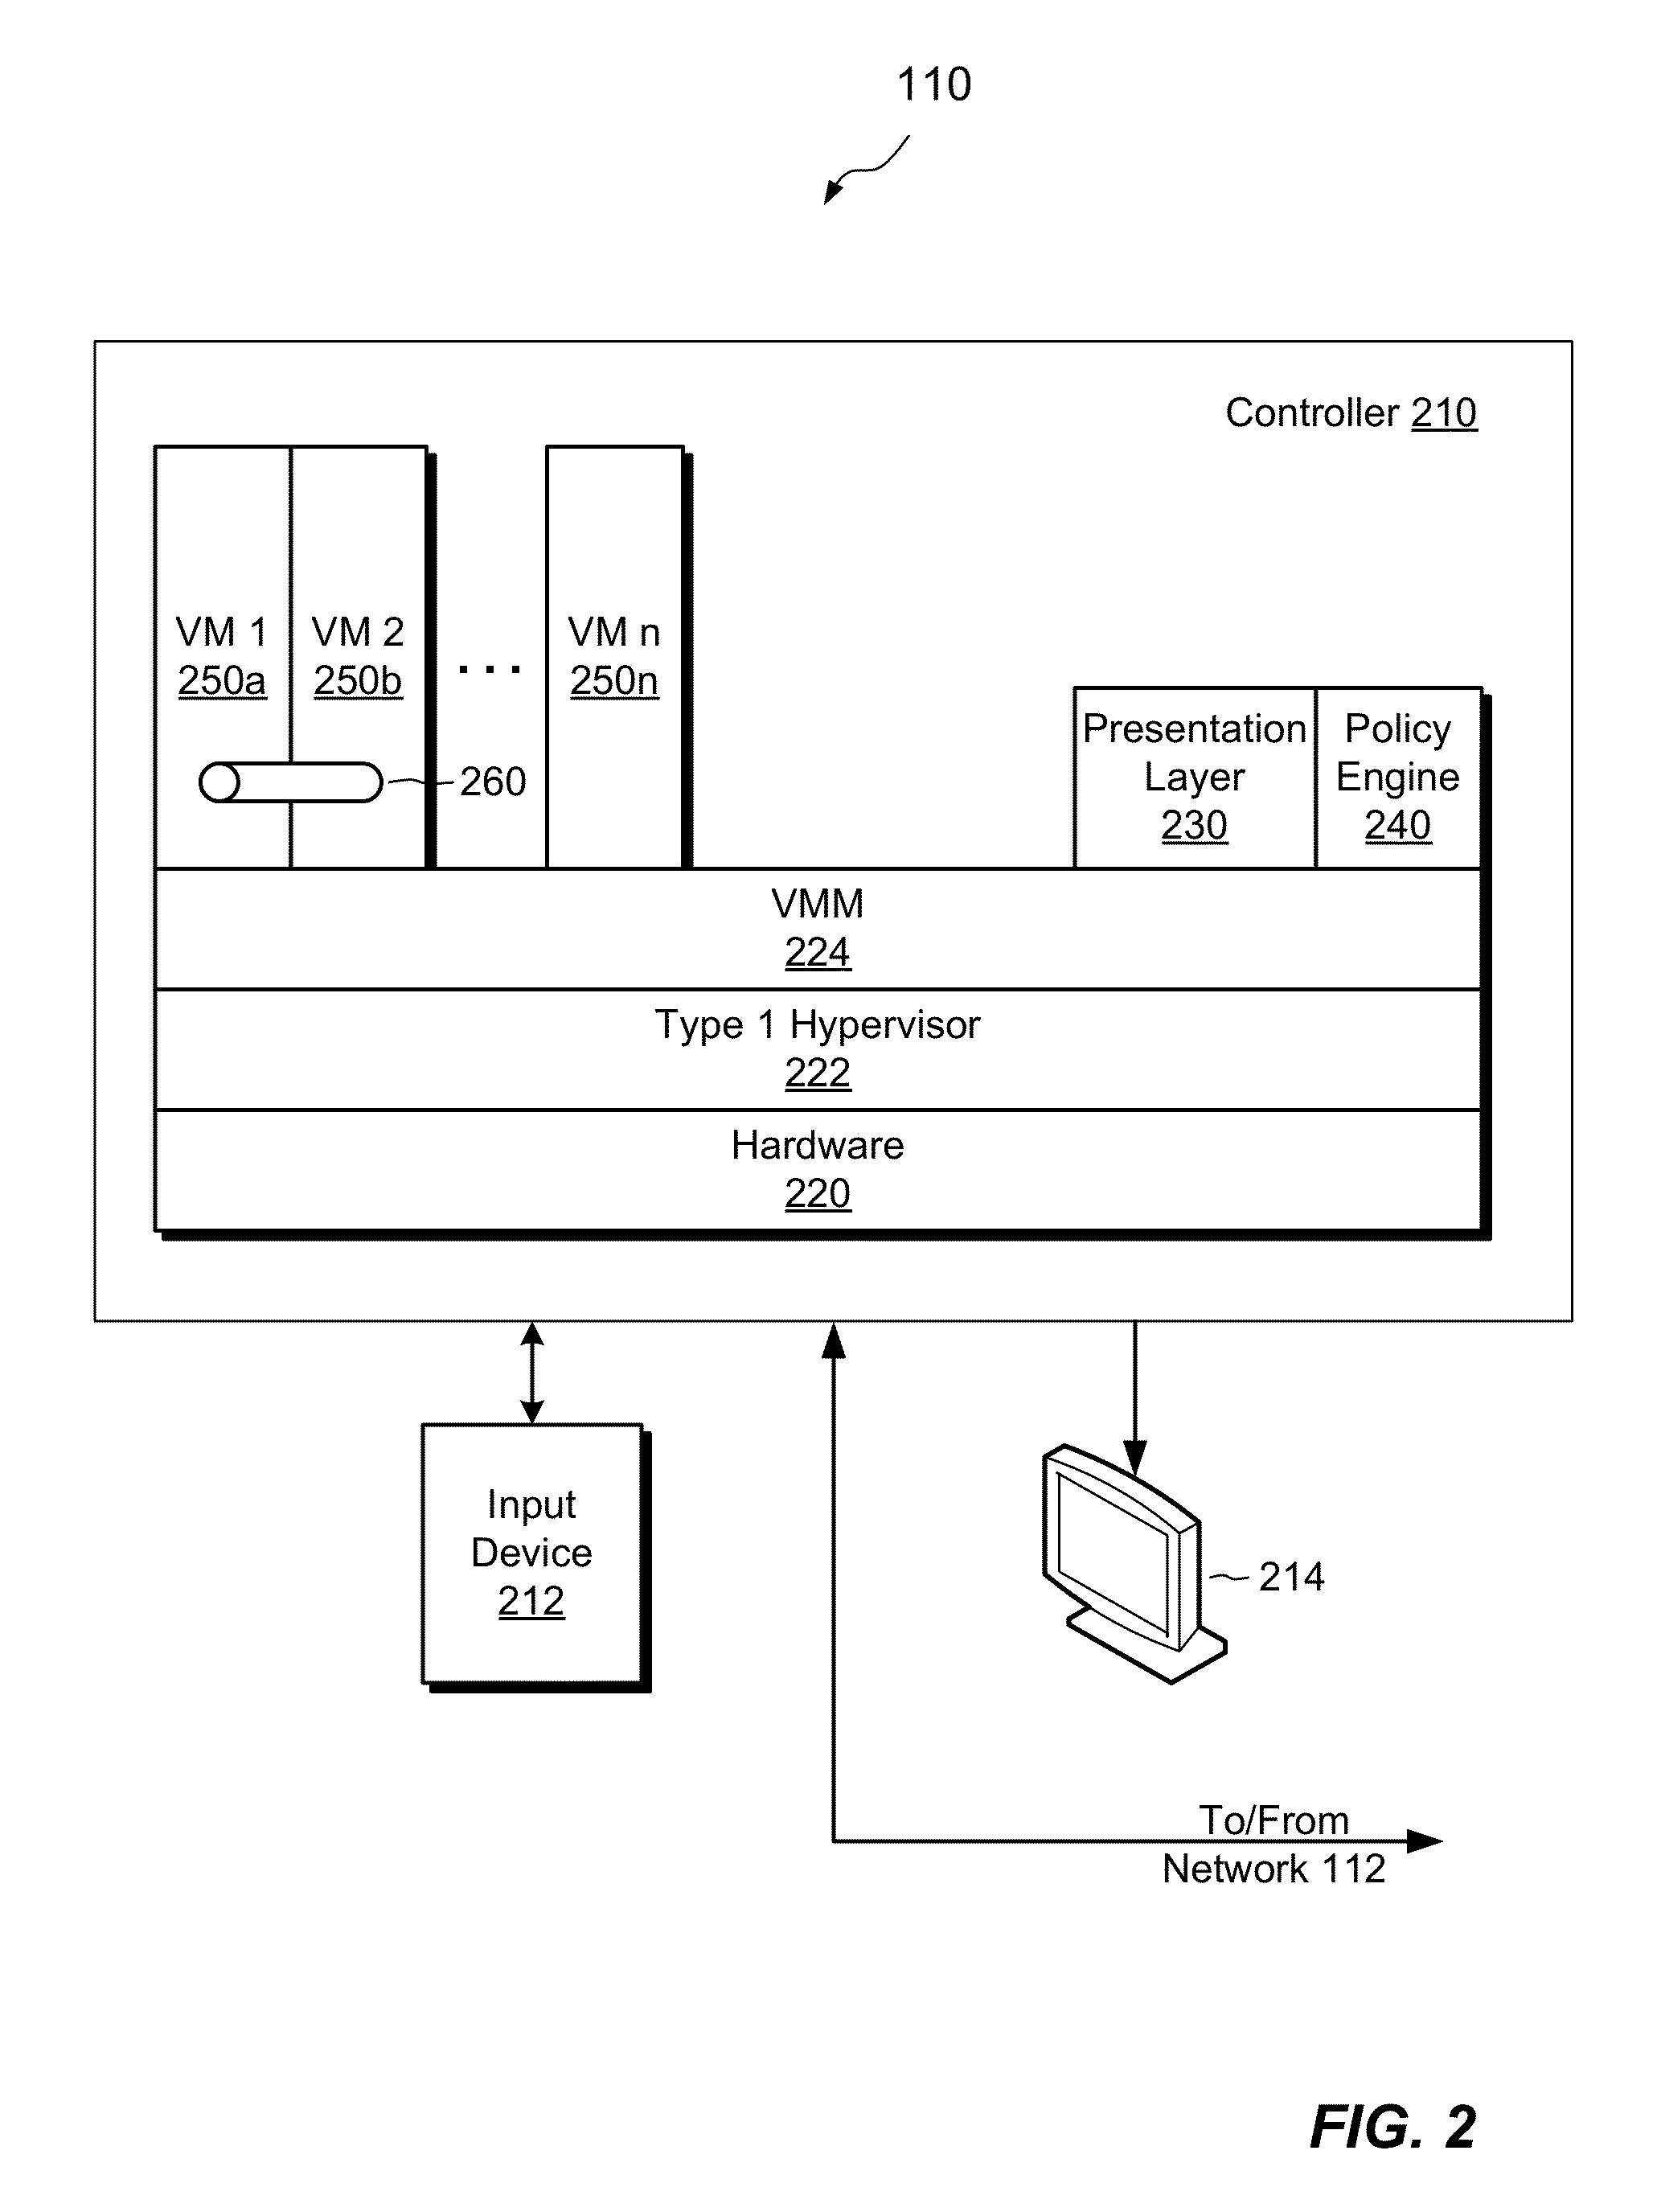 Computing with presentation layer for multiple virtual machines